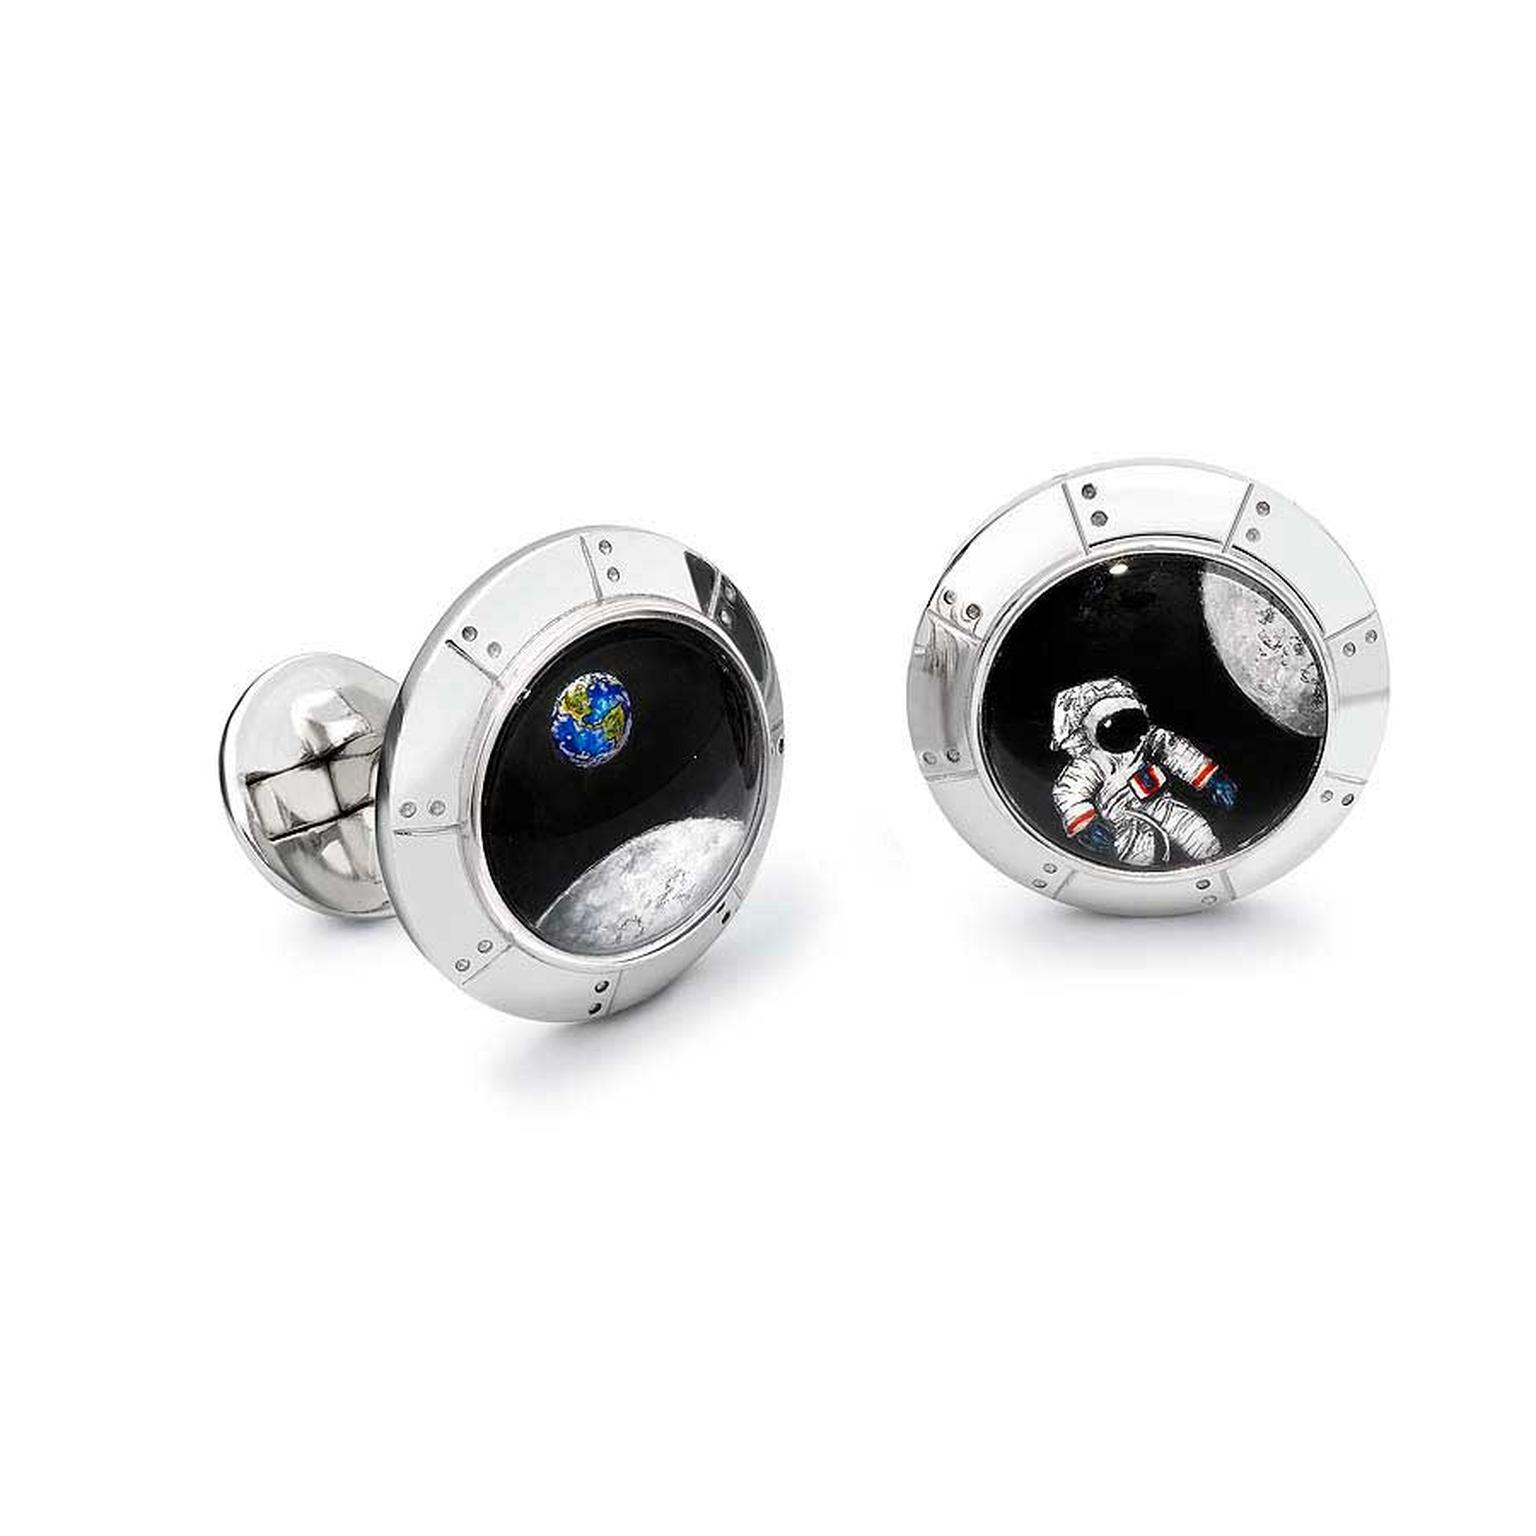 Theo Fennell Essex Crystal Moon Safari Cufflinks (£9,850). Essex Crystal is a process where rock crystals are carved and engraved from behind and then hand painted to give a 3D appearance.